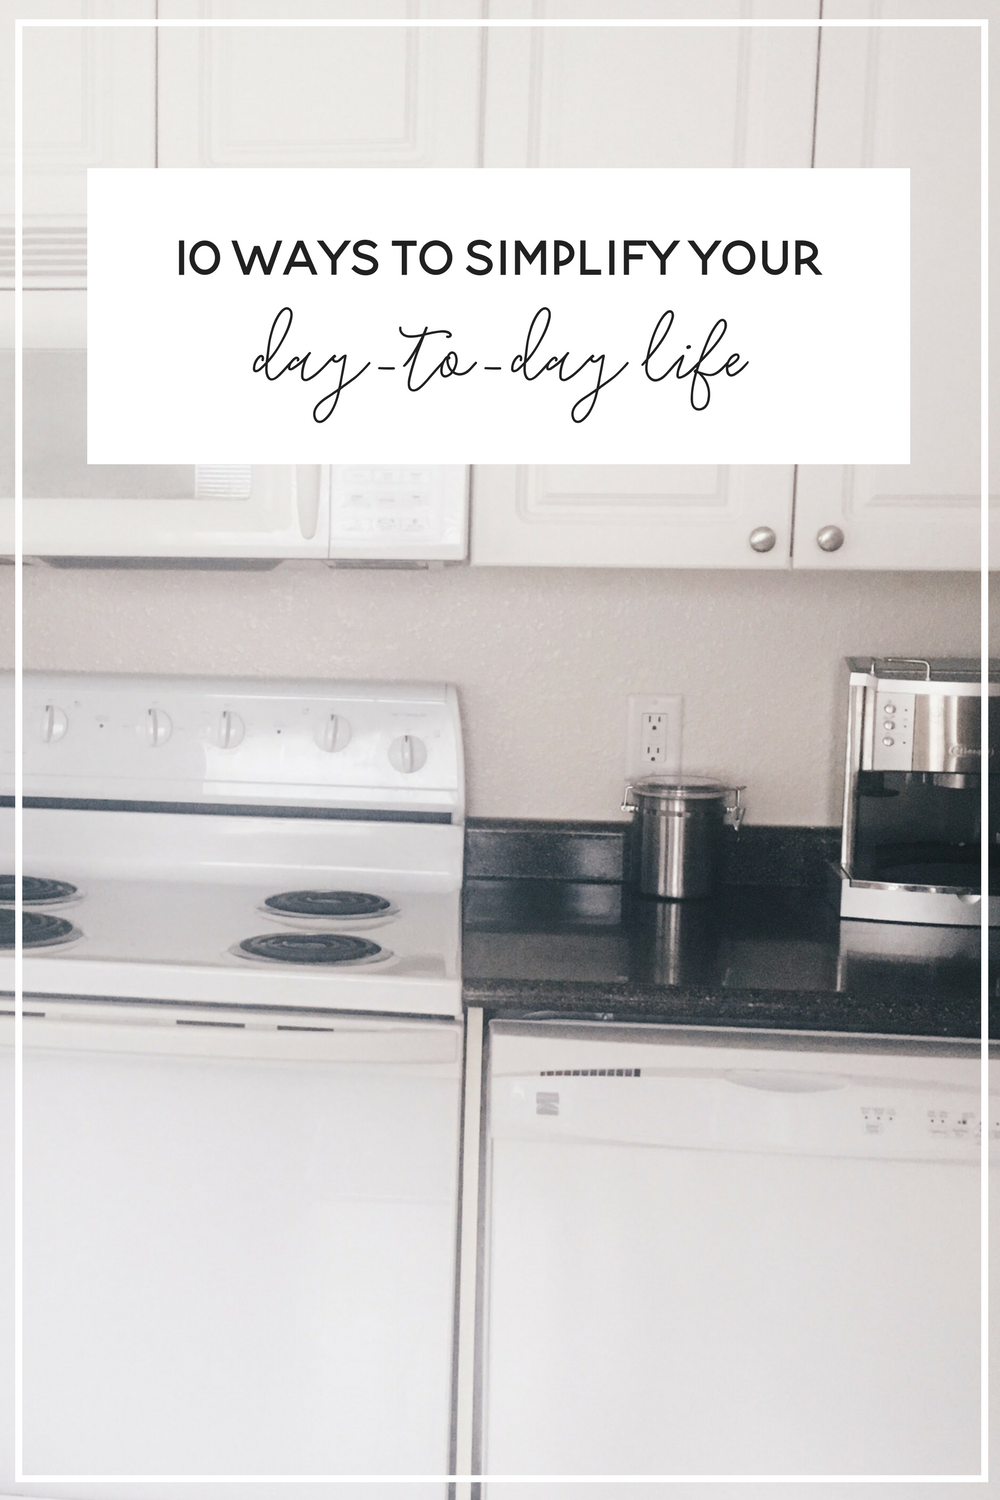 10 Ways to Simplify Your day-to-day Life